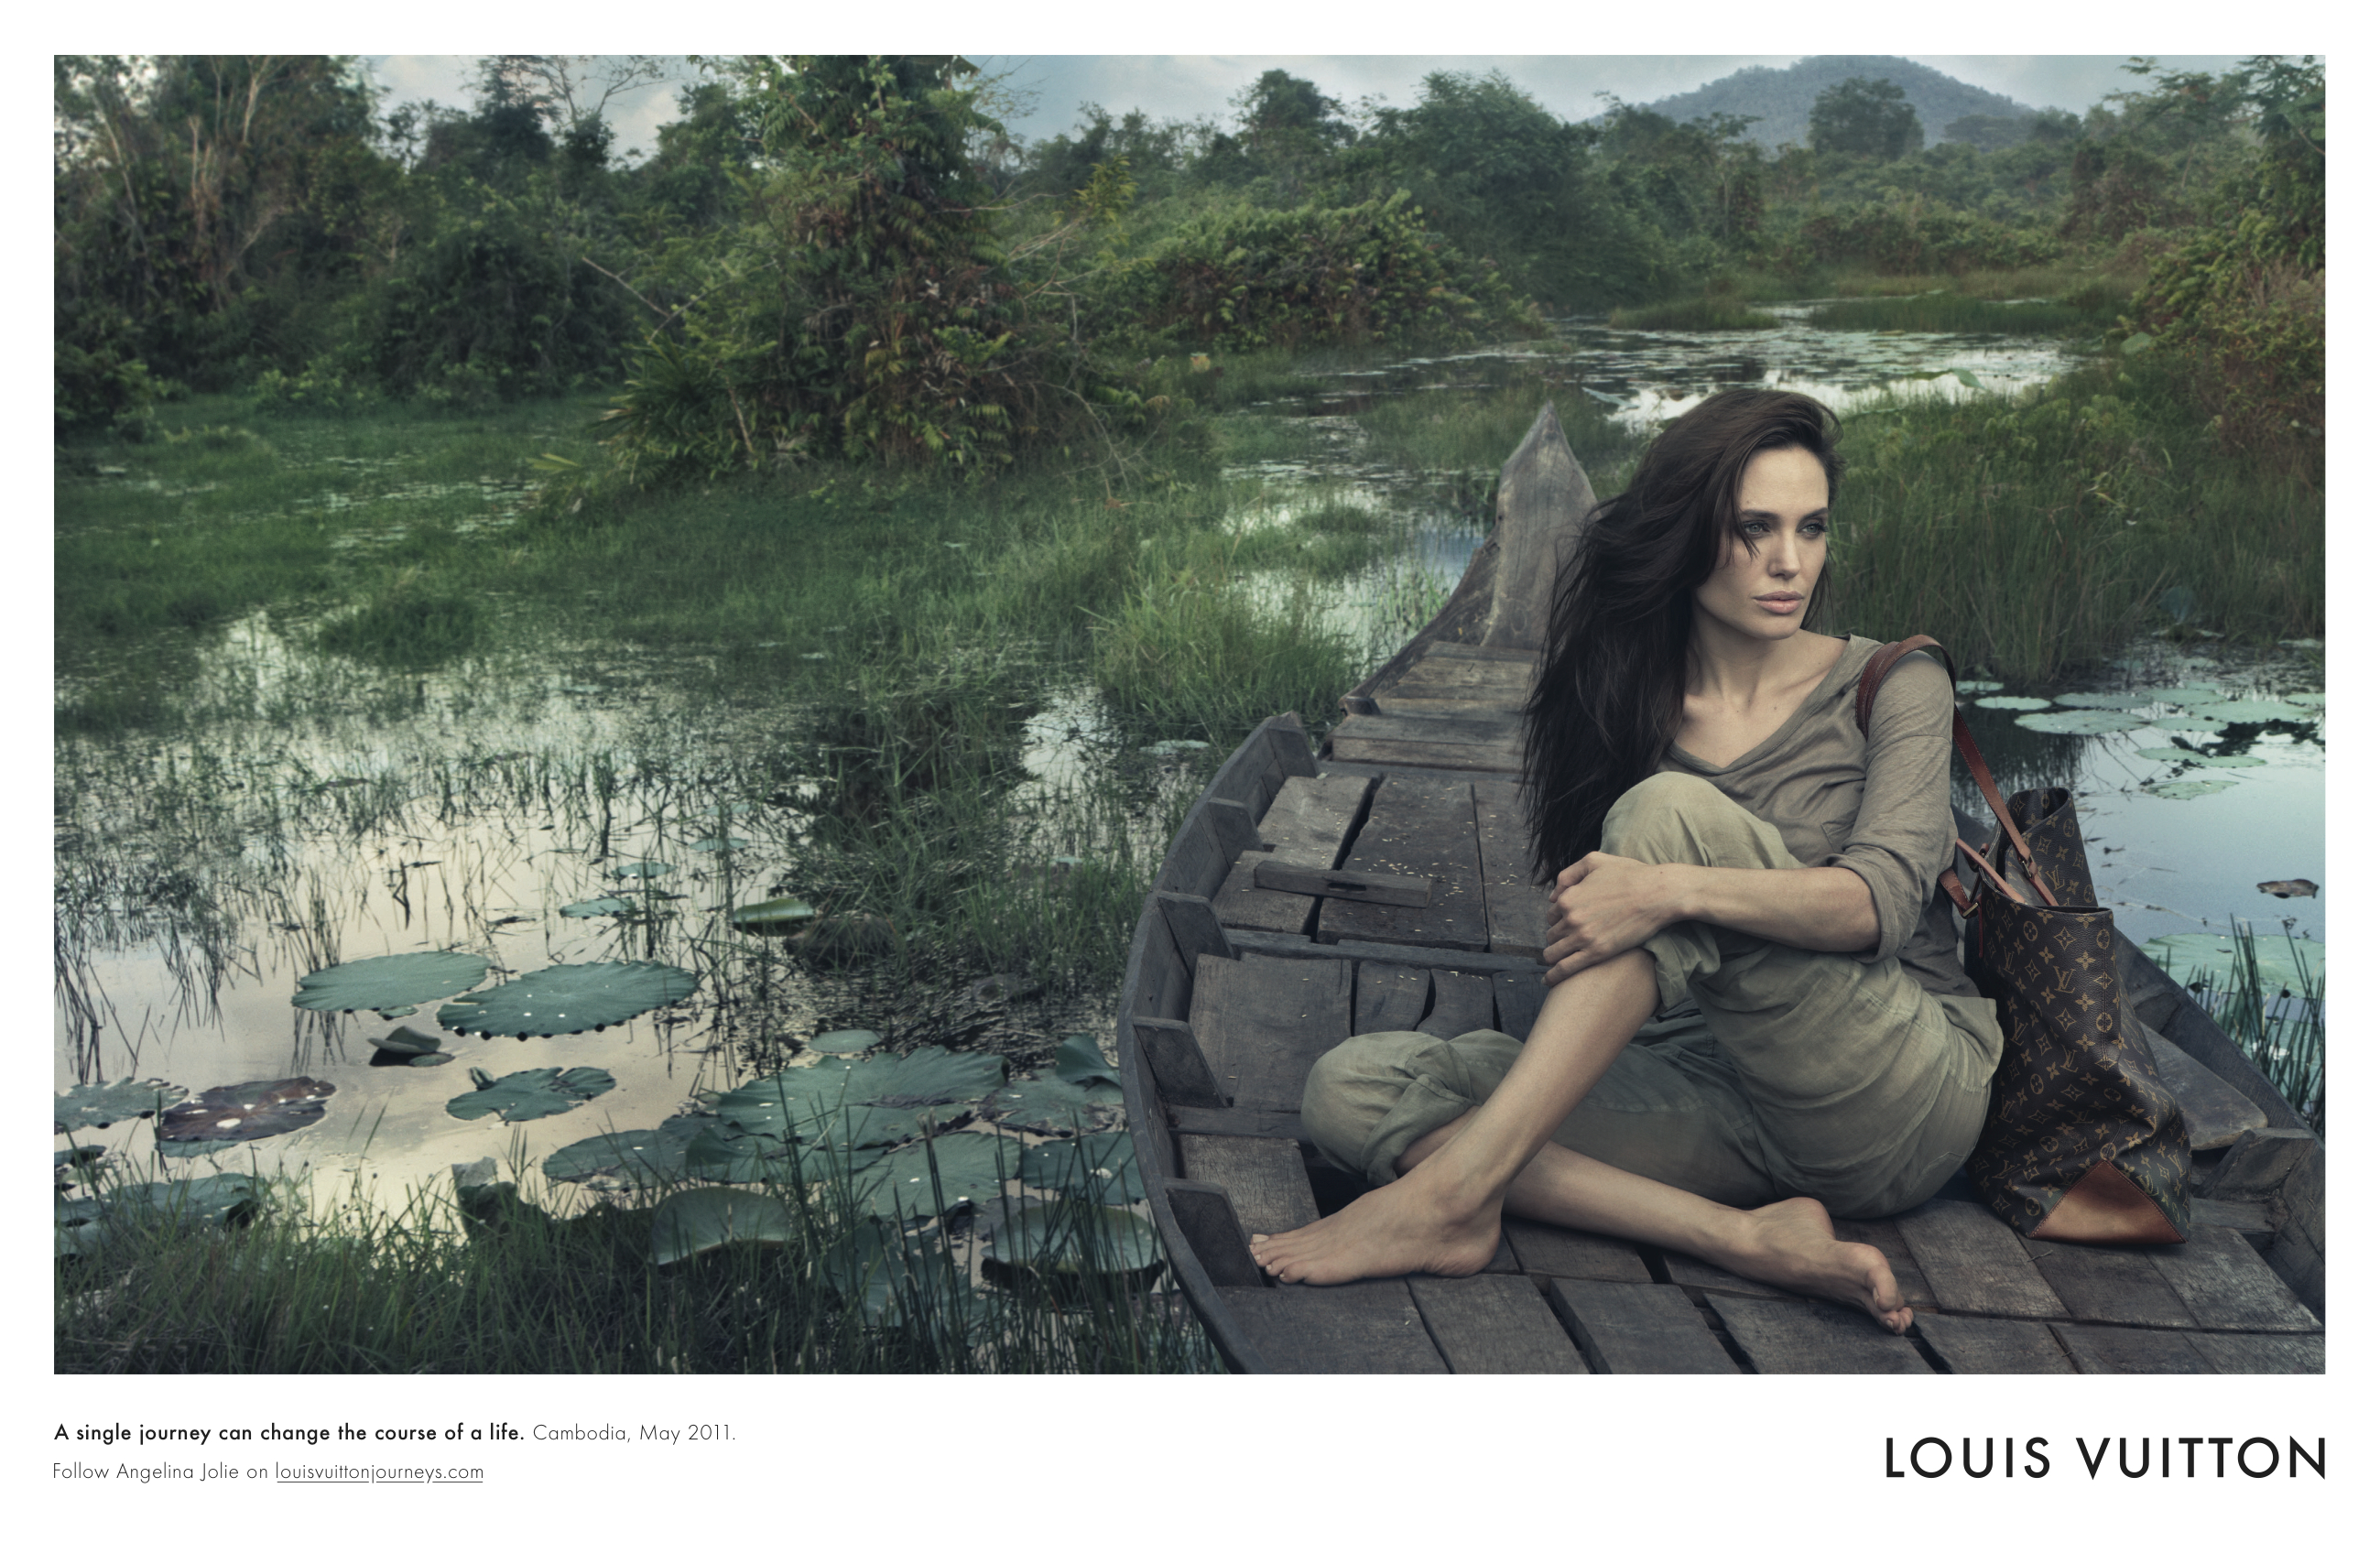 Louis Vuitton on X: Inside every journey, there is a beautiful story.  Argentina, 2008. Acclaimed filmmakers Sofia and Francis Ford Coppola were  photographed by Annie Leibovitz for the Core Values Campaign. #LouisVuitton